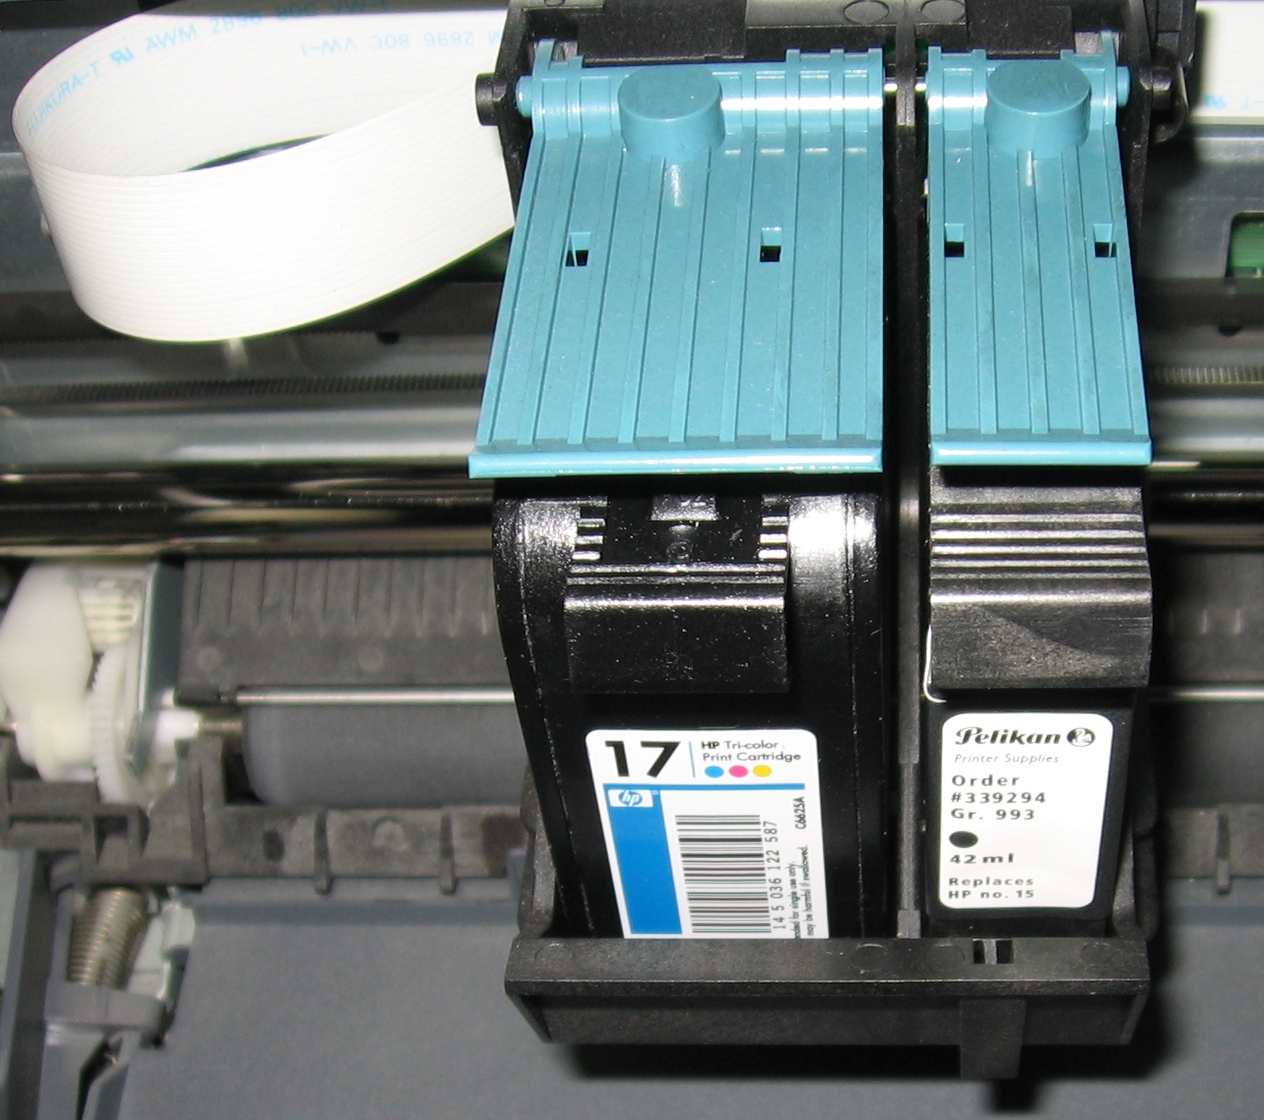 Cleaning electrical contacts on printer cartridge